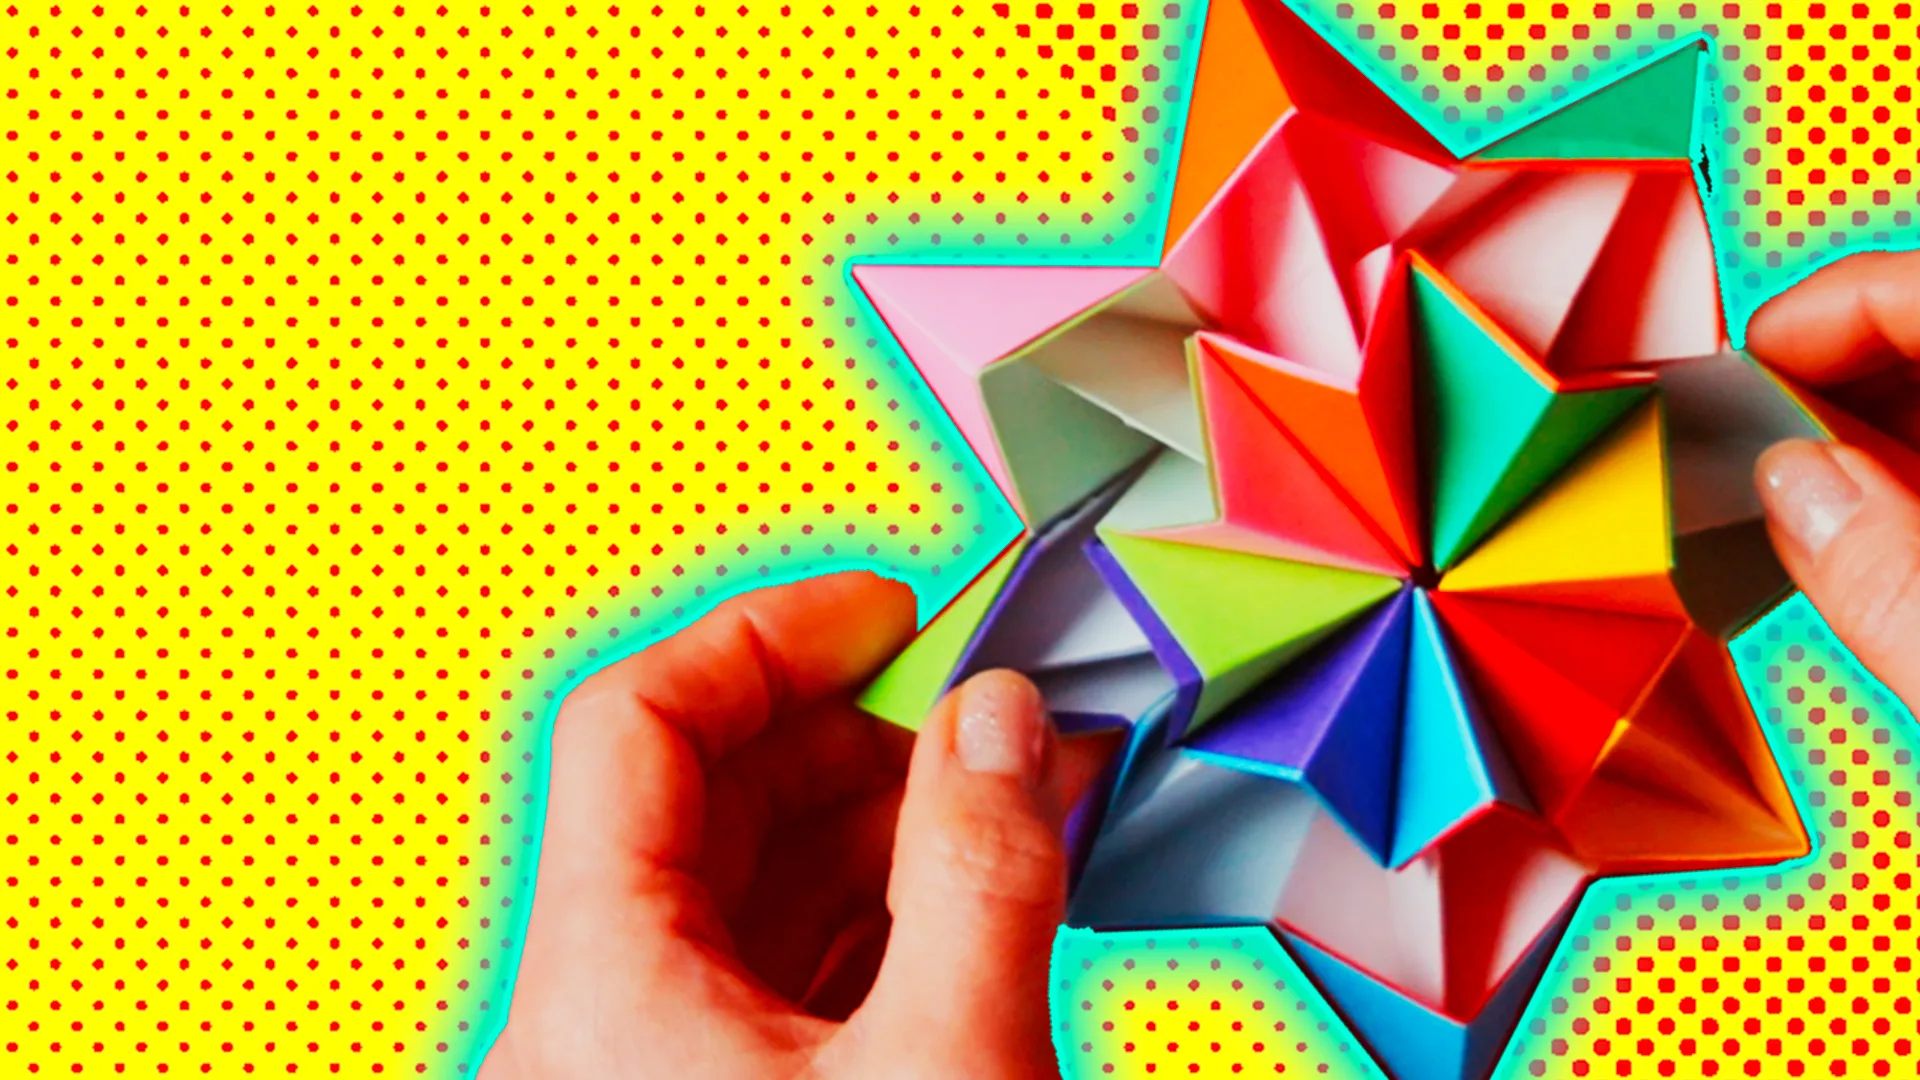 A multicolour paper origami kaleidoscope against a yellow background